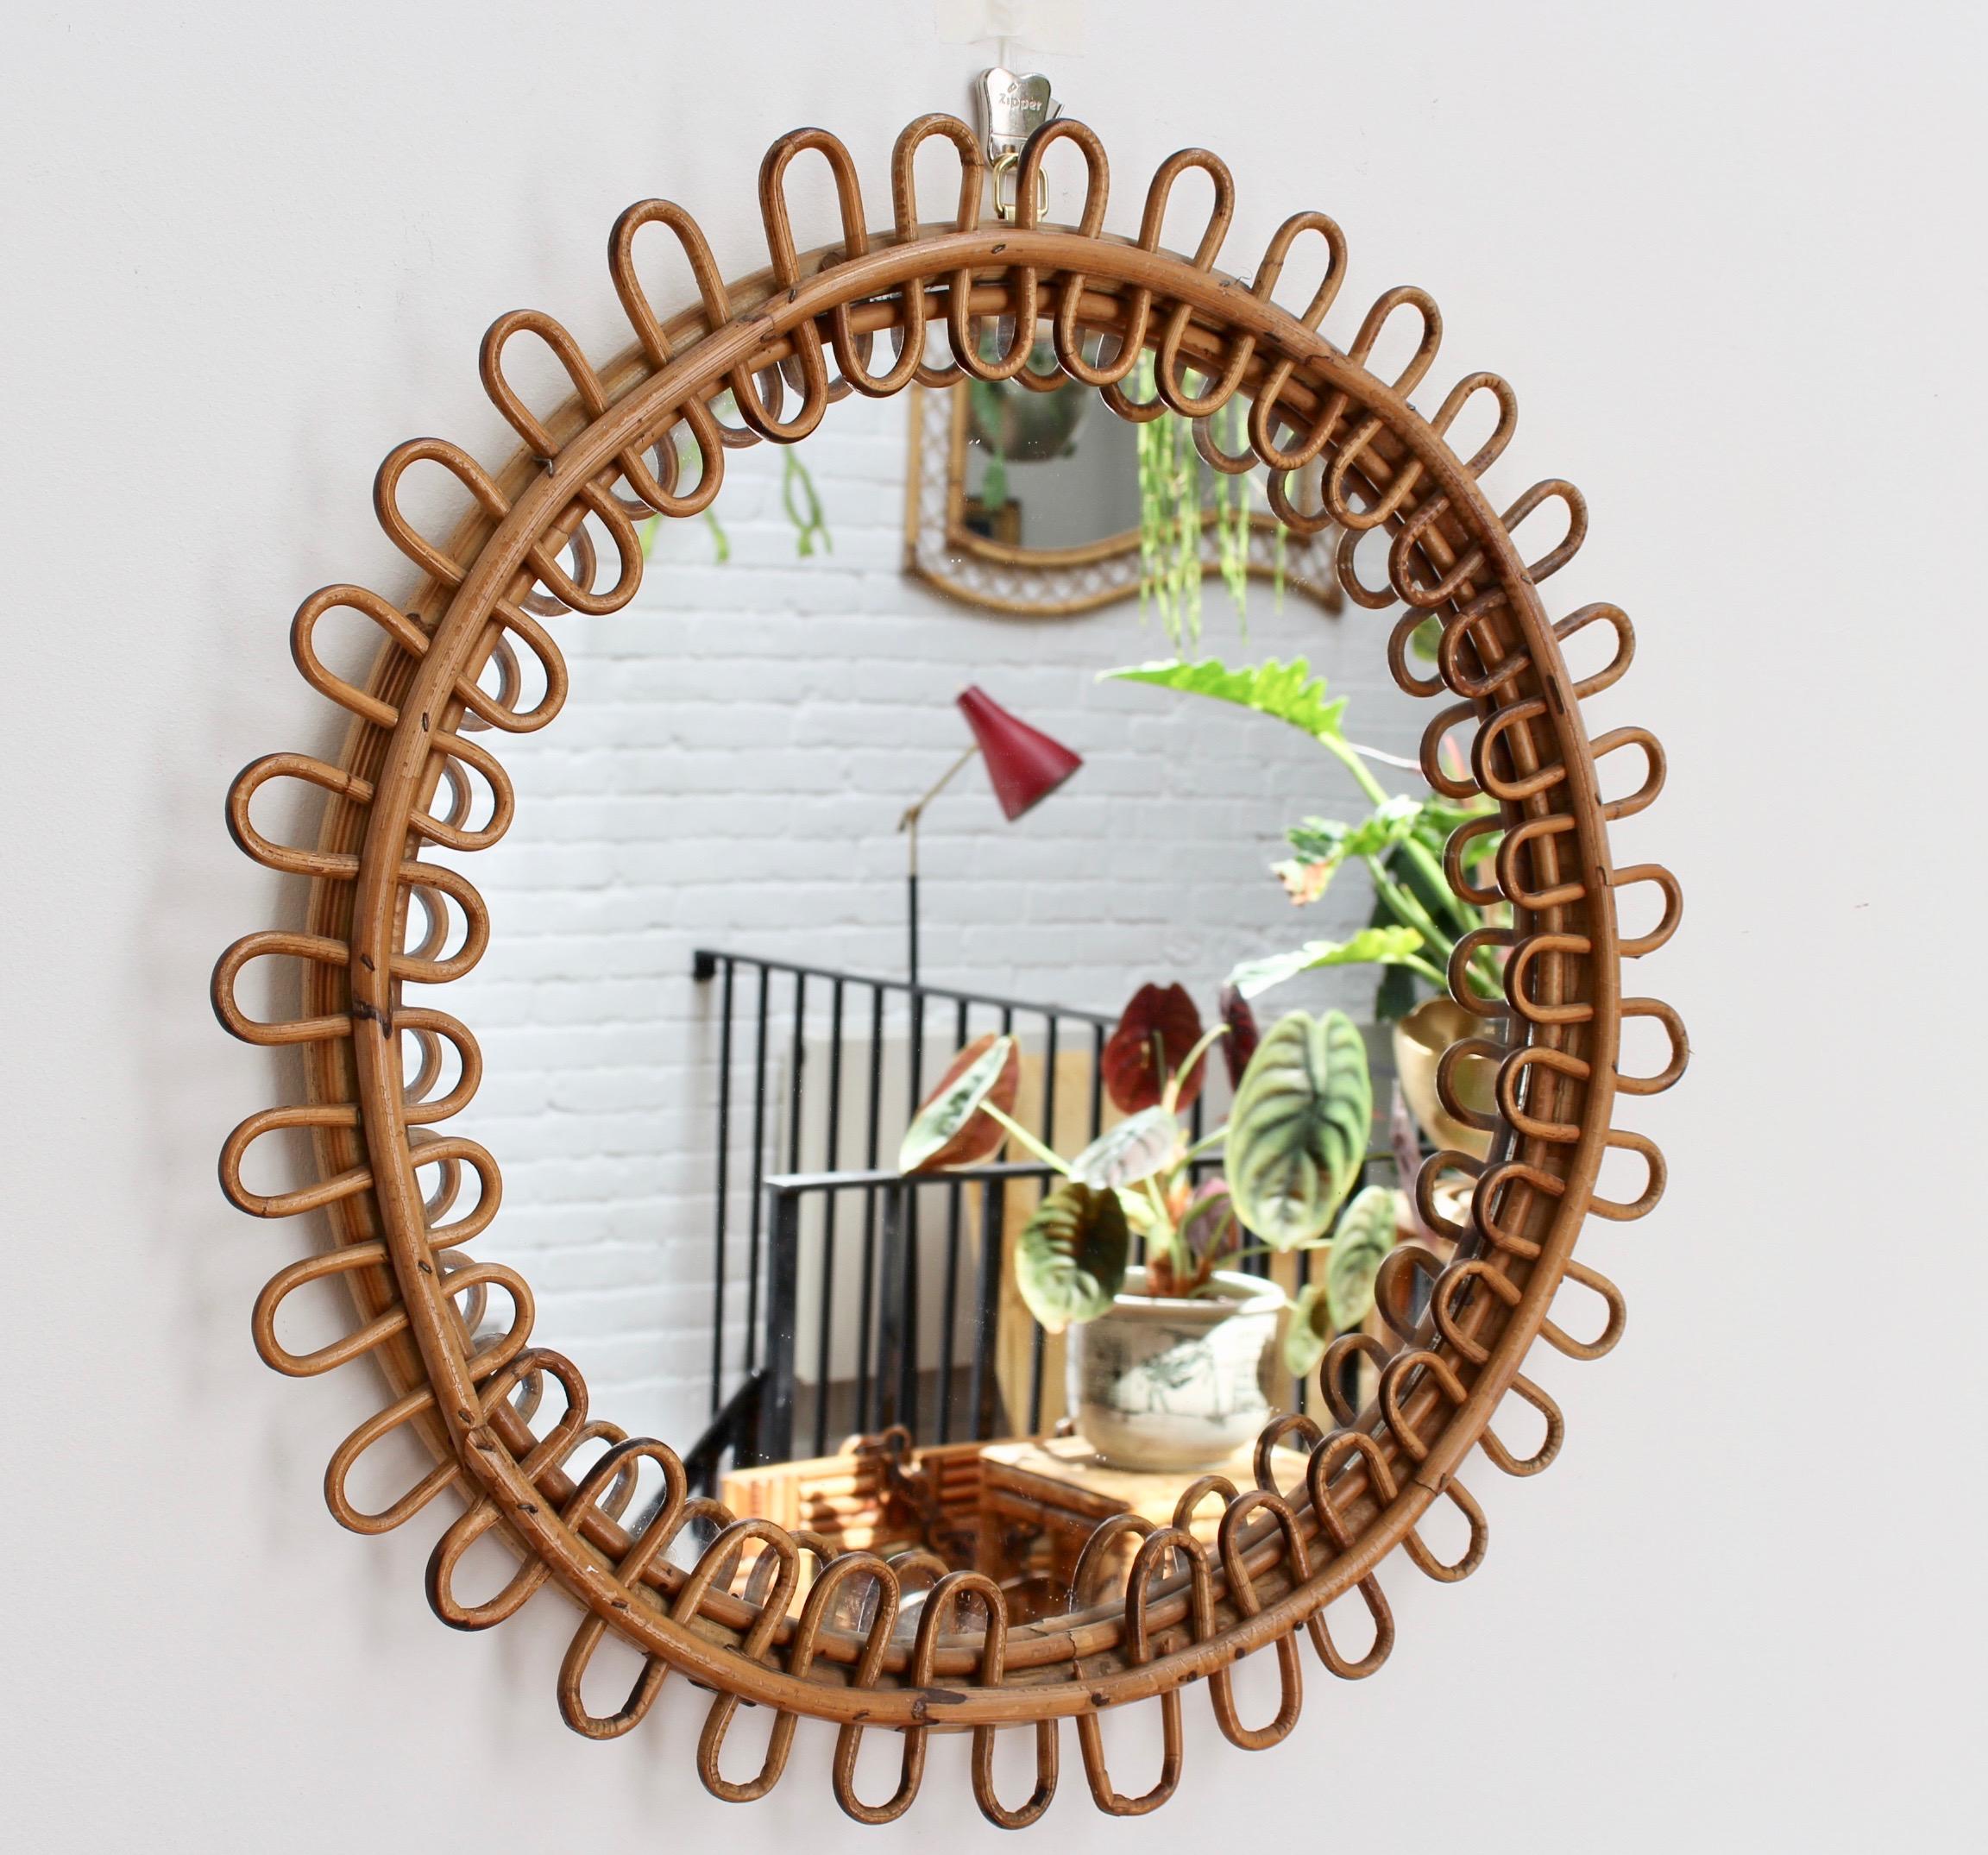 Midcentury Italian round rattan mirror (circa 1960s). Chic and stylish circular sunburst mirror with cane frame and undulating rattan border. Let the sunshine in to your home and your life. In fair vintage condition commensurate with age and usage.